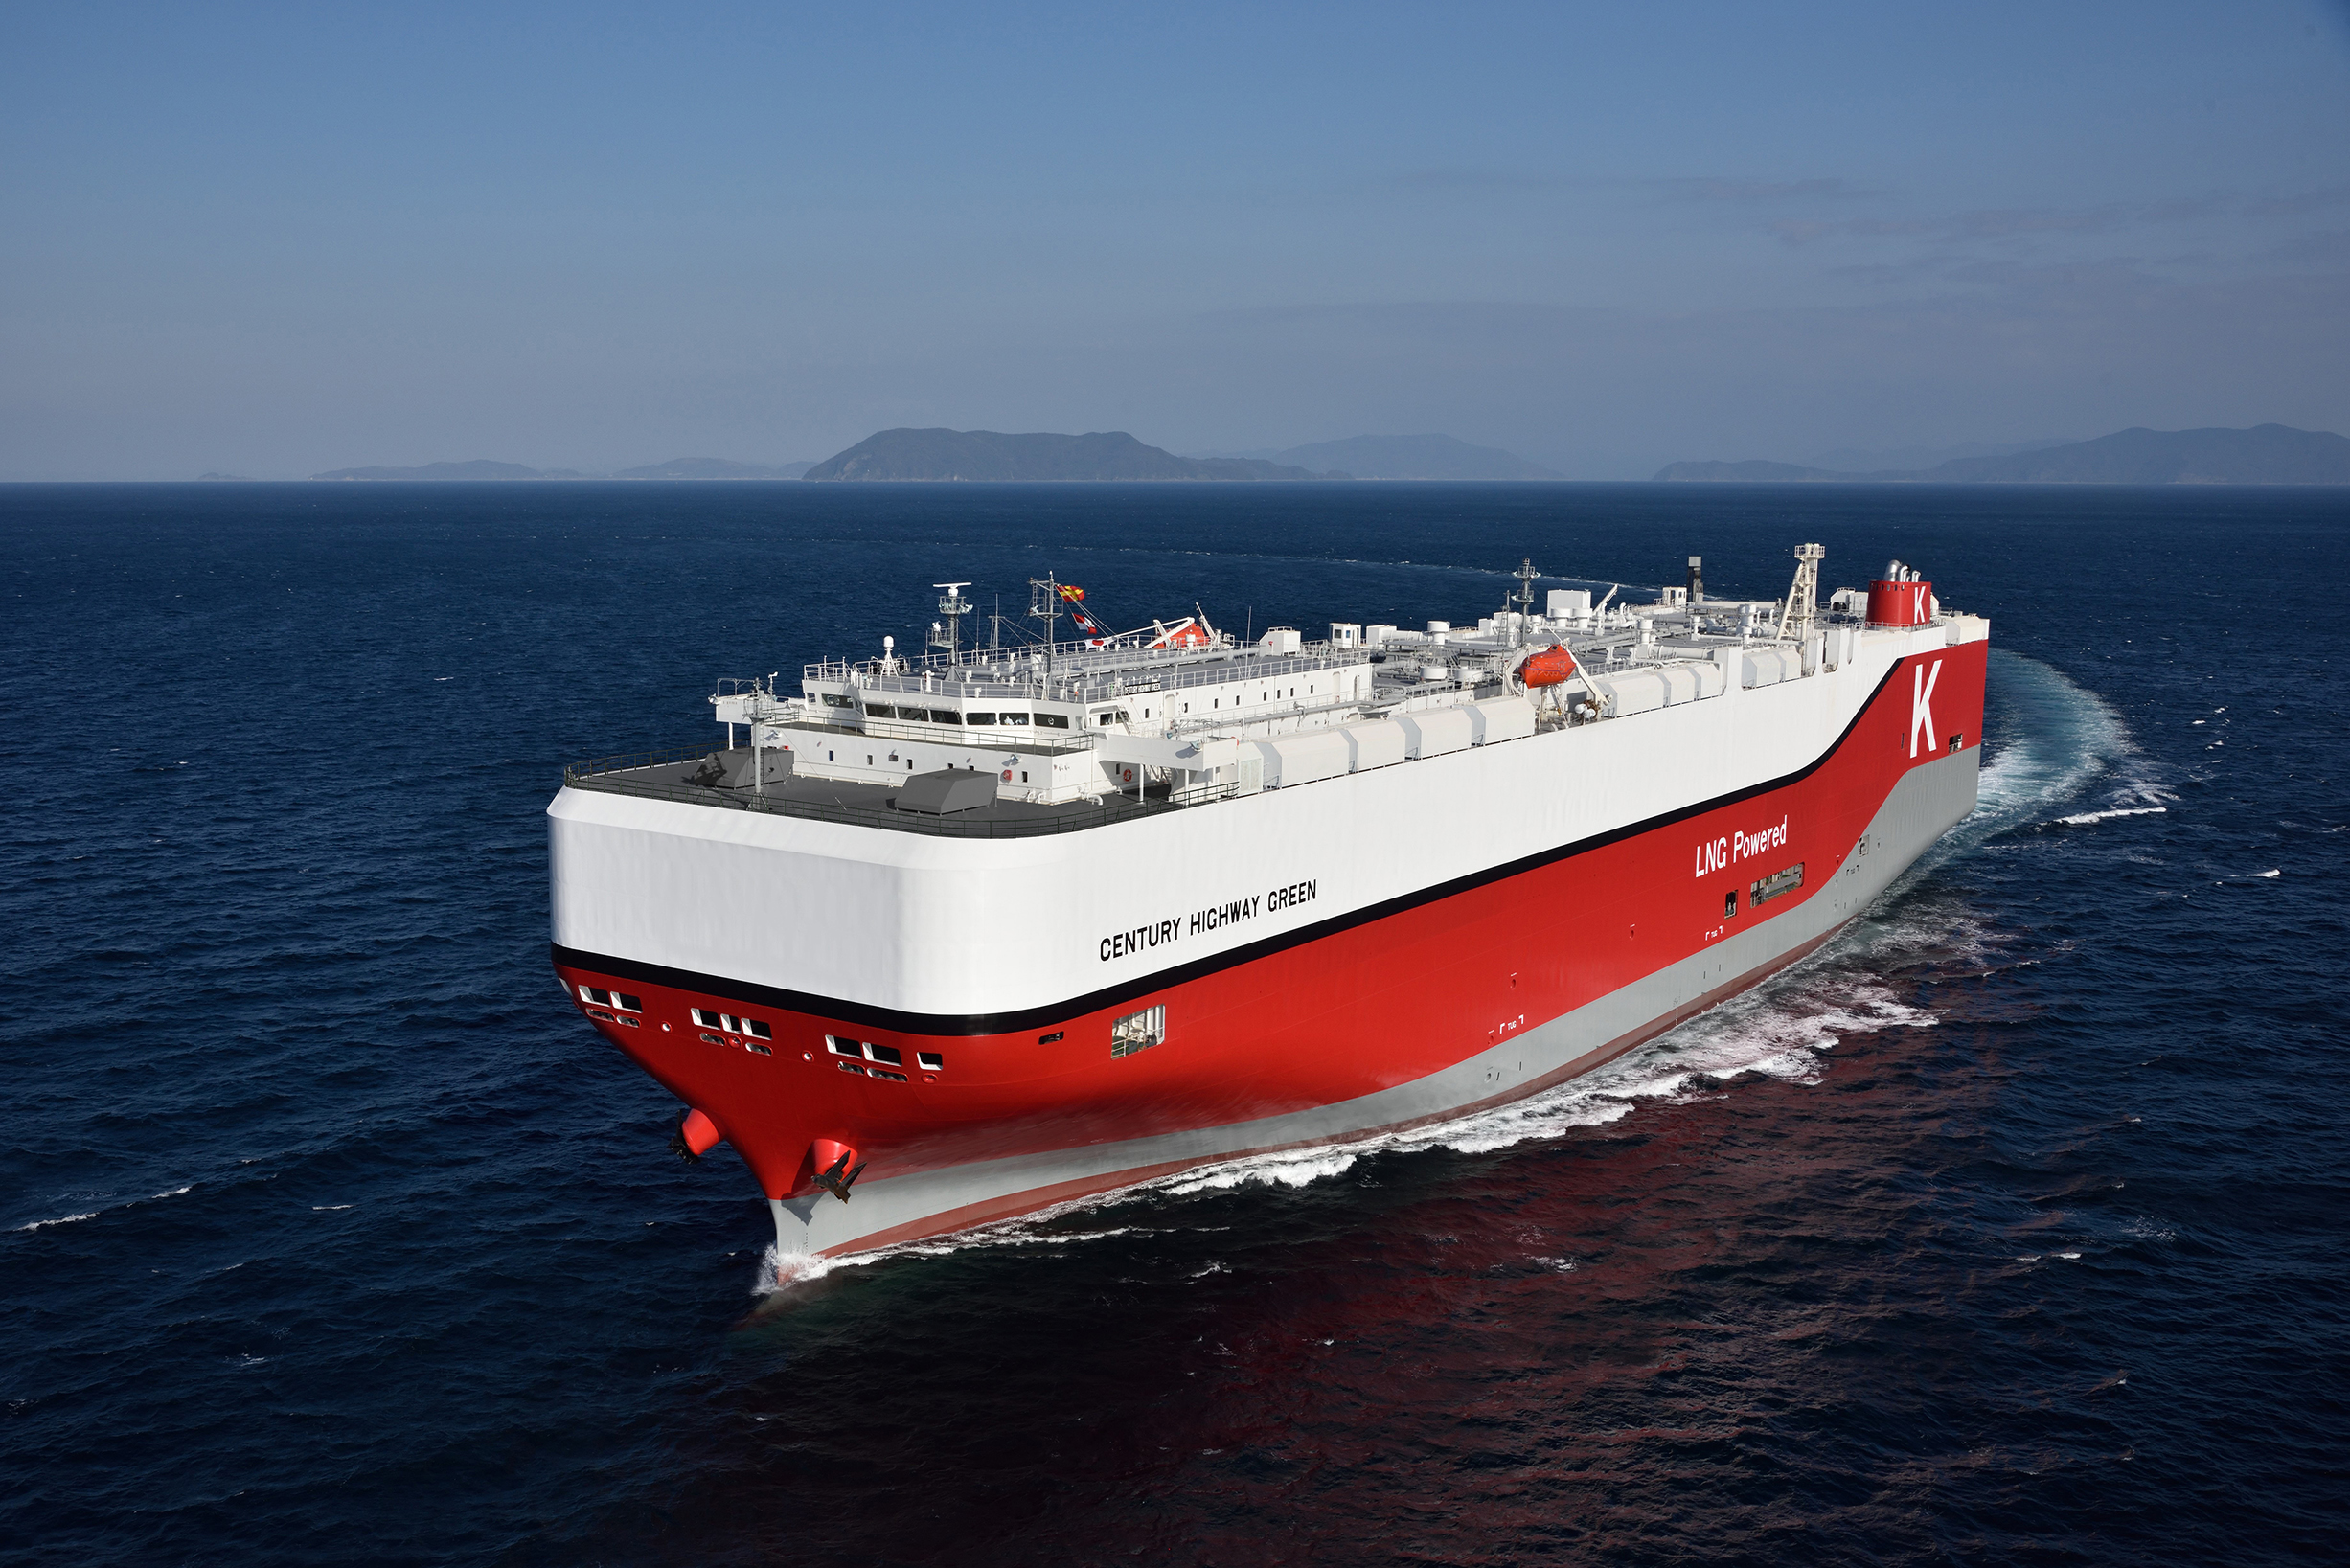 Next-generation Environmentally <br/>Friendly Car Carrier Fueled by LNG<br/>”CENTURY HIGHWAY GREEN” 